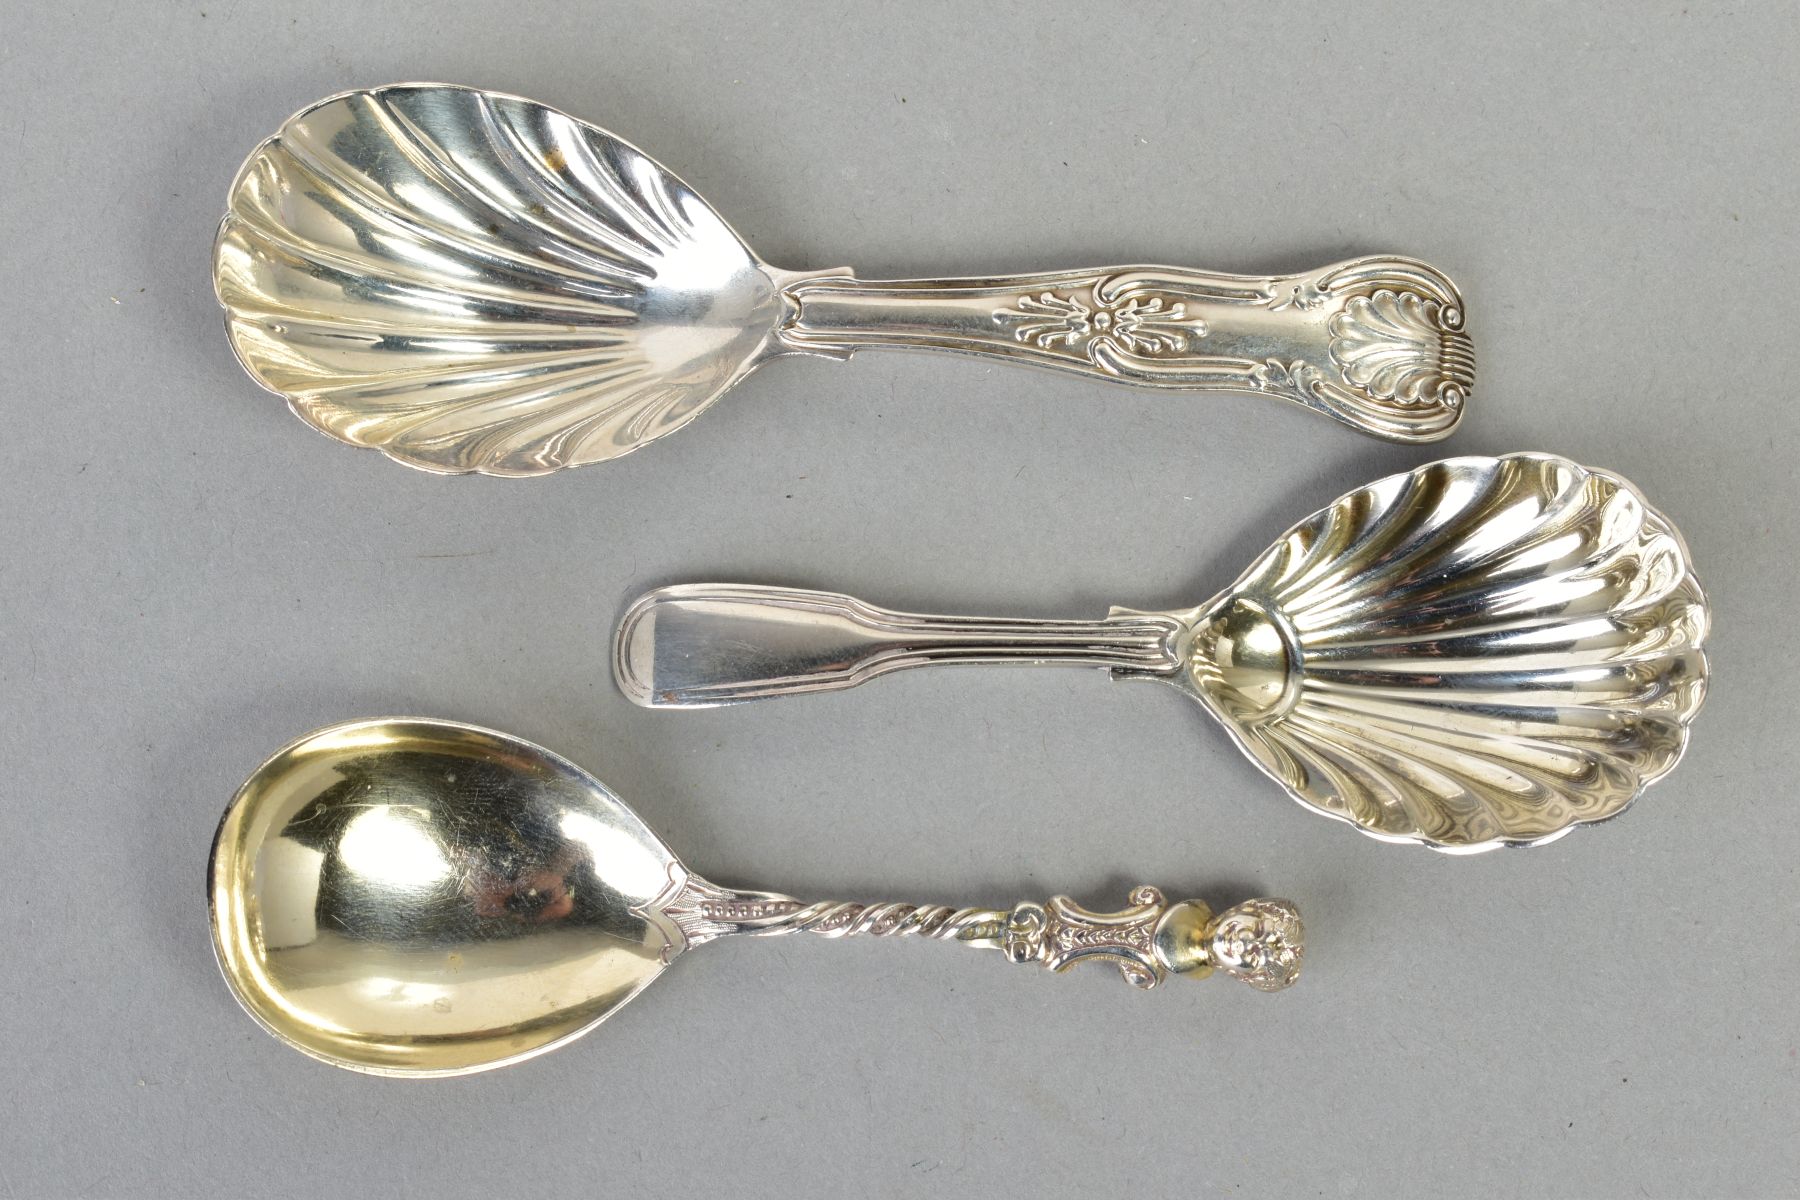 THREE SILVER CADDY SPOONS, to include a Victorian spoon with a cherub to the end of the handle and a